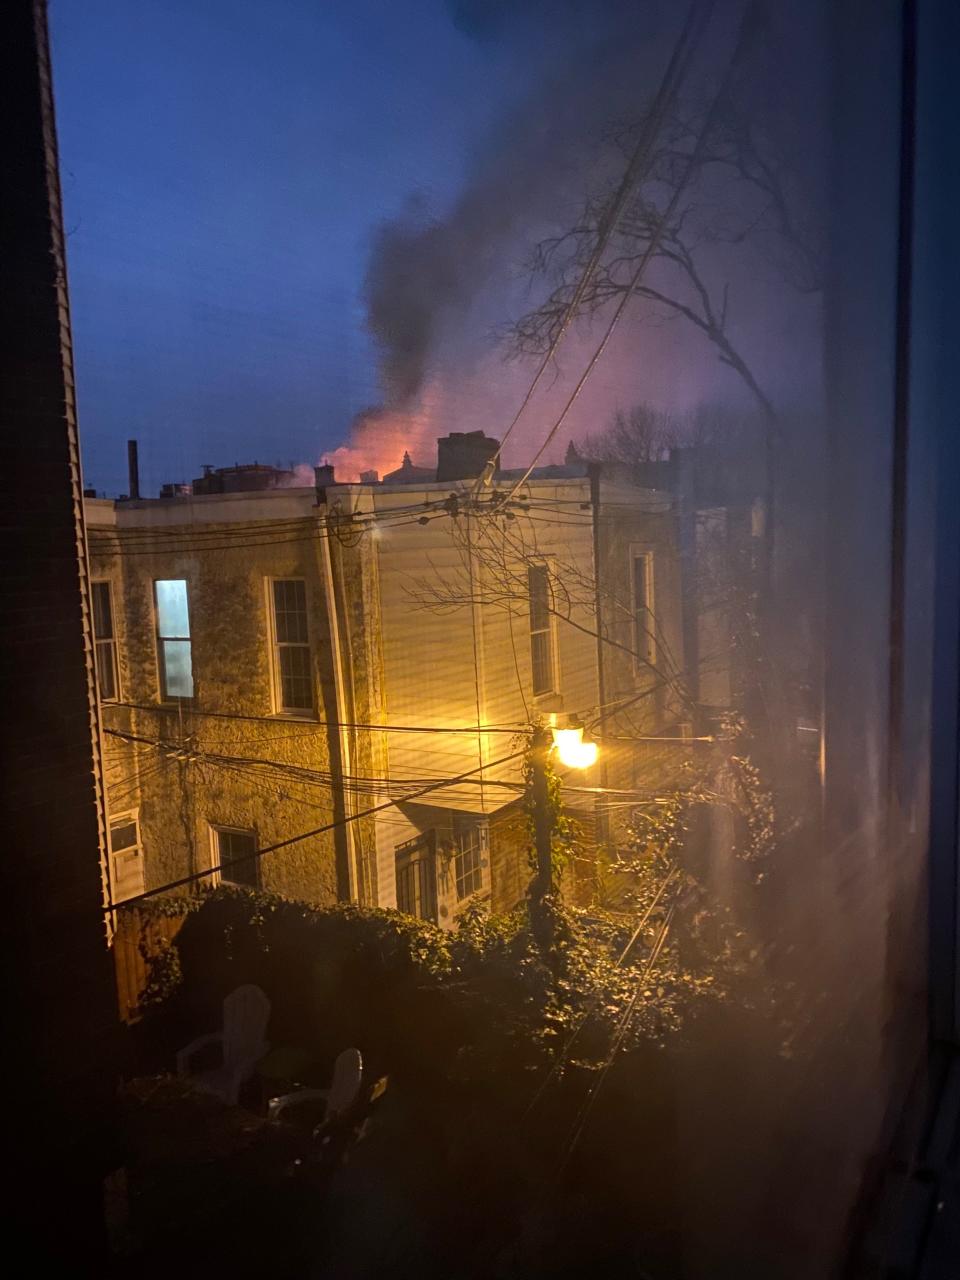 Philadelphia resident James M. Miller took this photo at about 6:30 a.m. Wednesday, showing smoke from what would become a fatal fire in the city's Fairmount section.